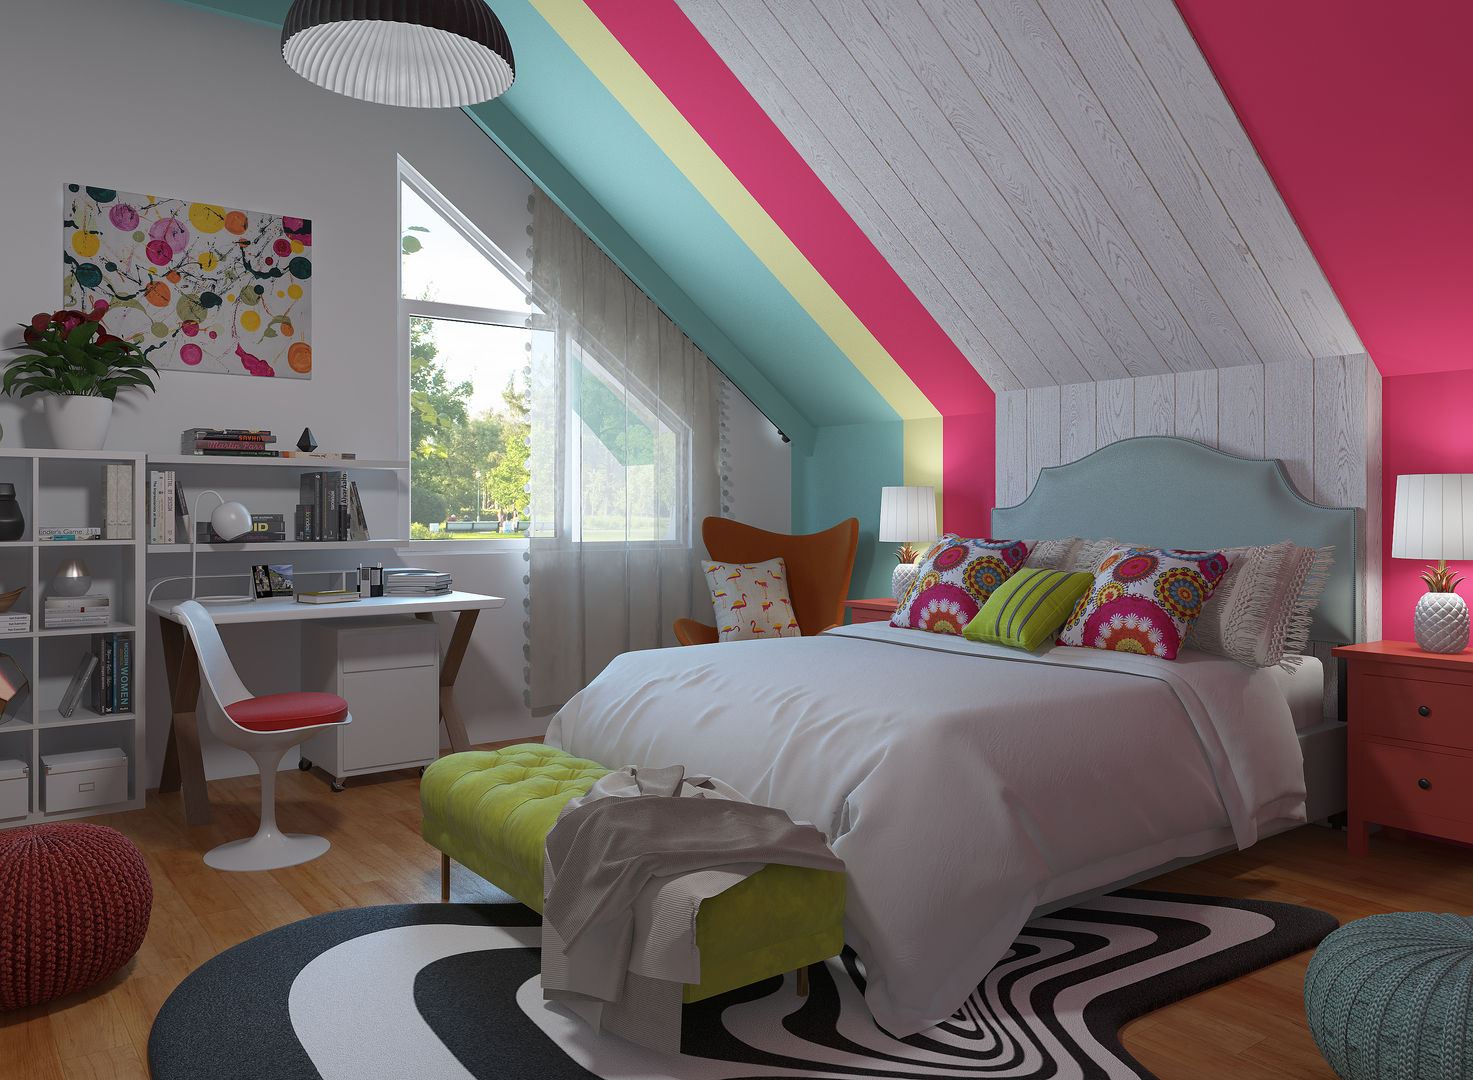 Eclectic -Pop Art decoration homify Eclectic style bedroom bedroom,decorate bedroom,how to decorate,pop art style,pop art bedroom,3d design,interior design,rendering,home deco,colourful,customized designs